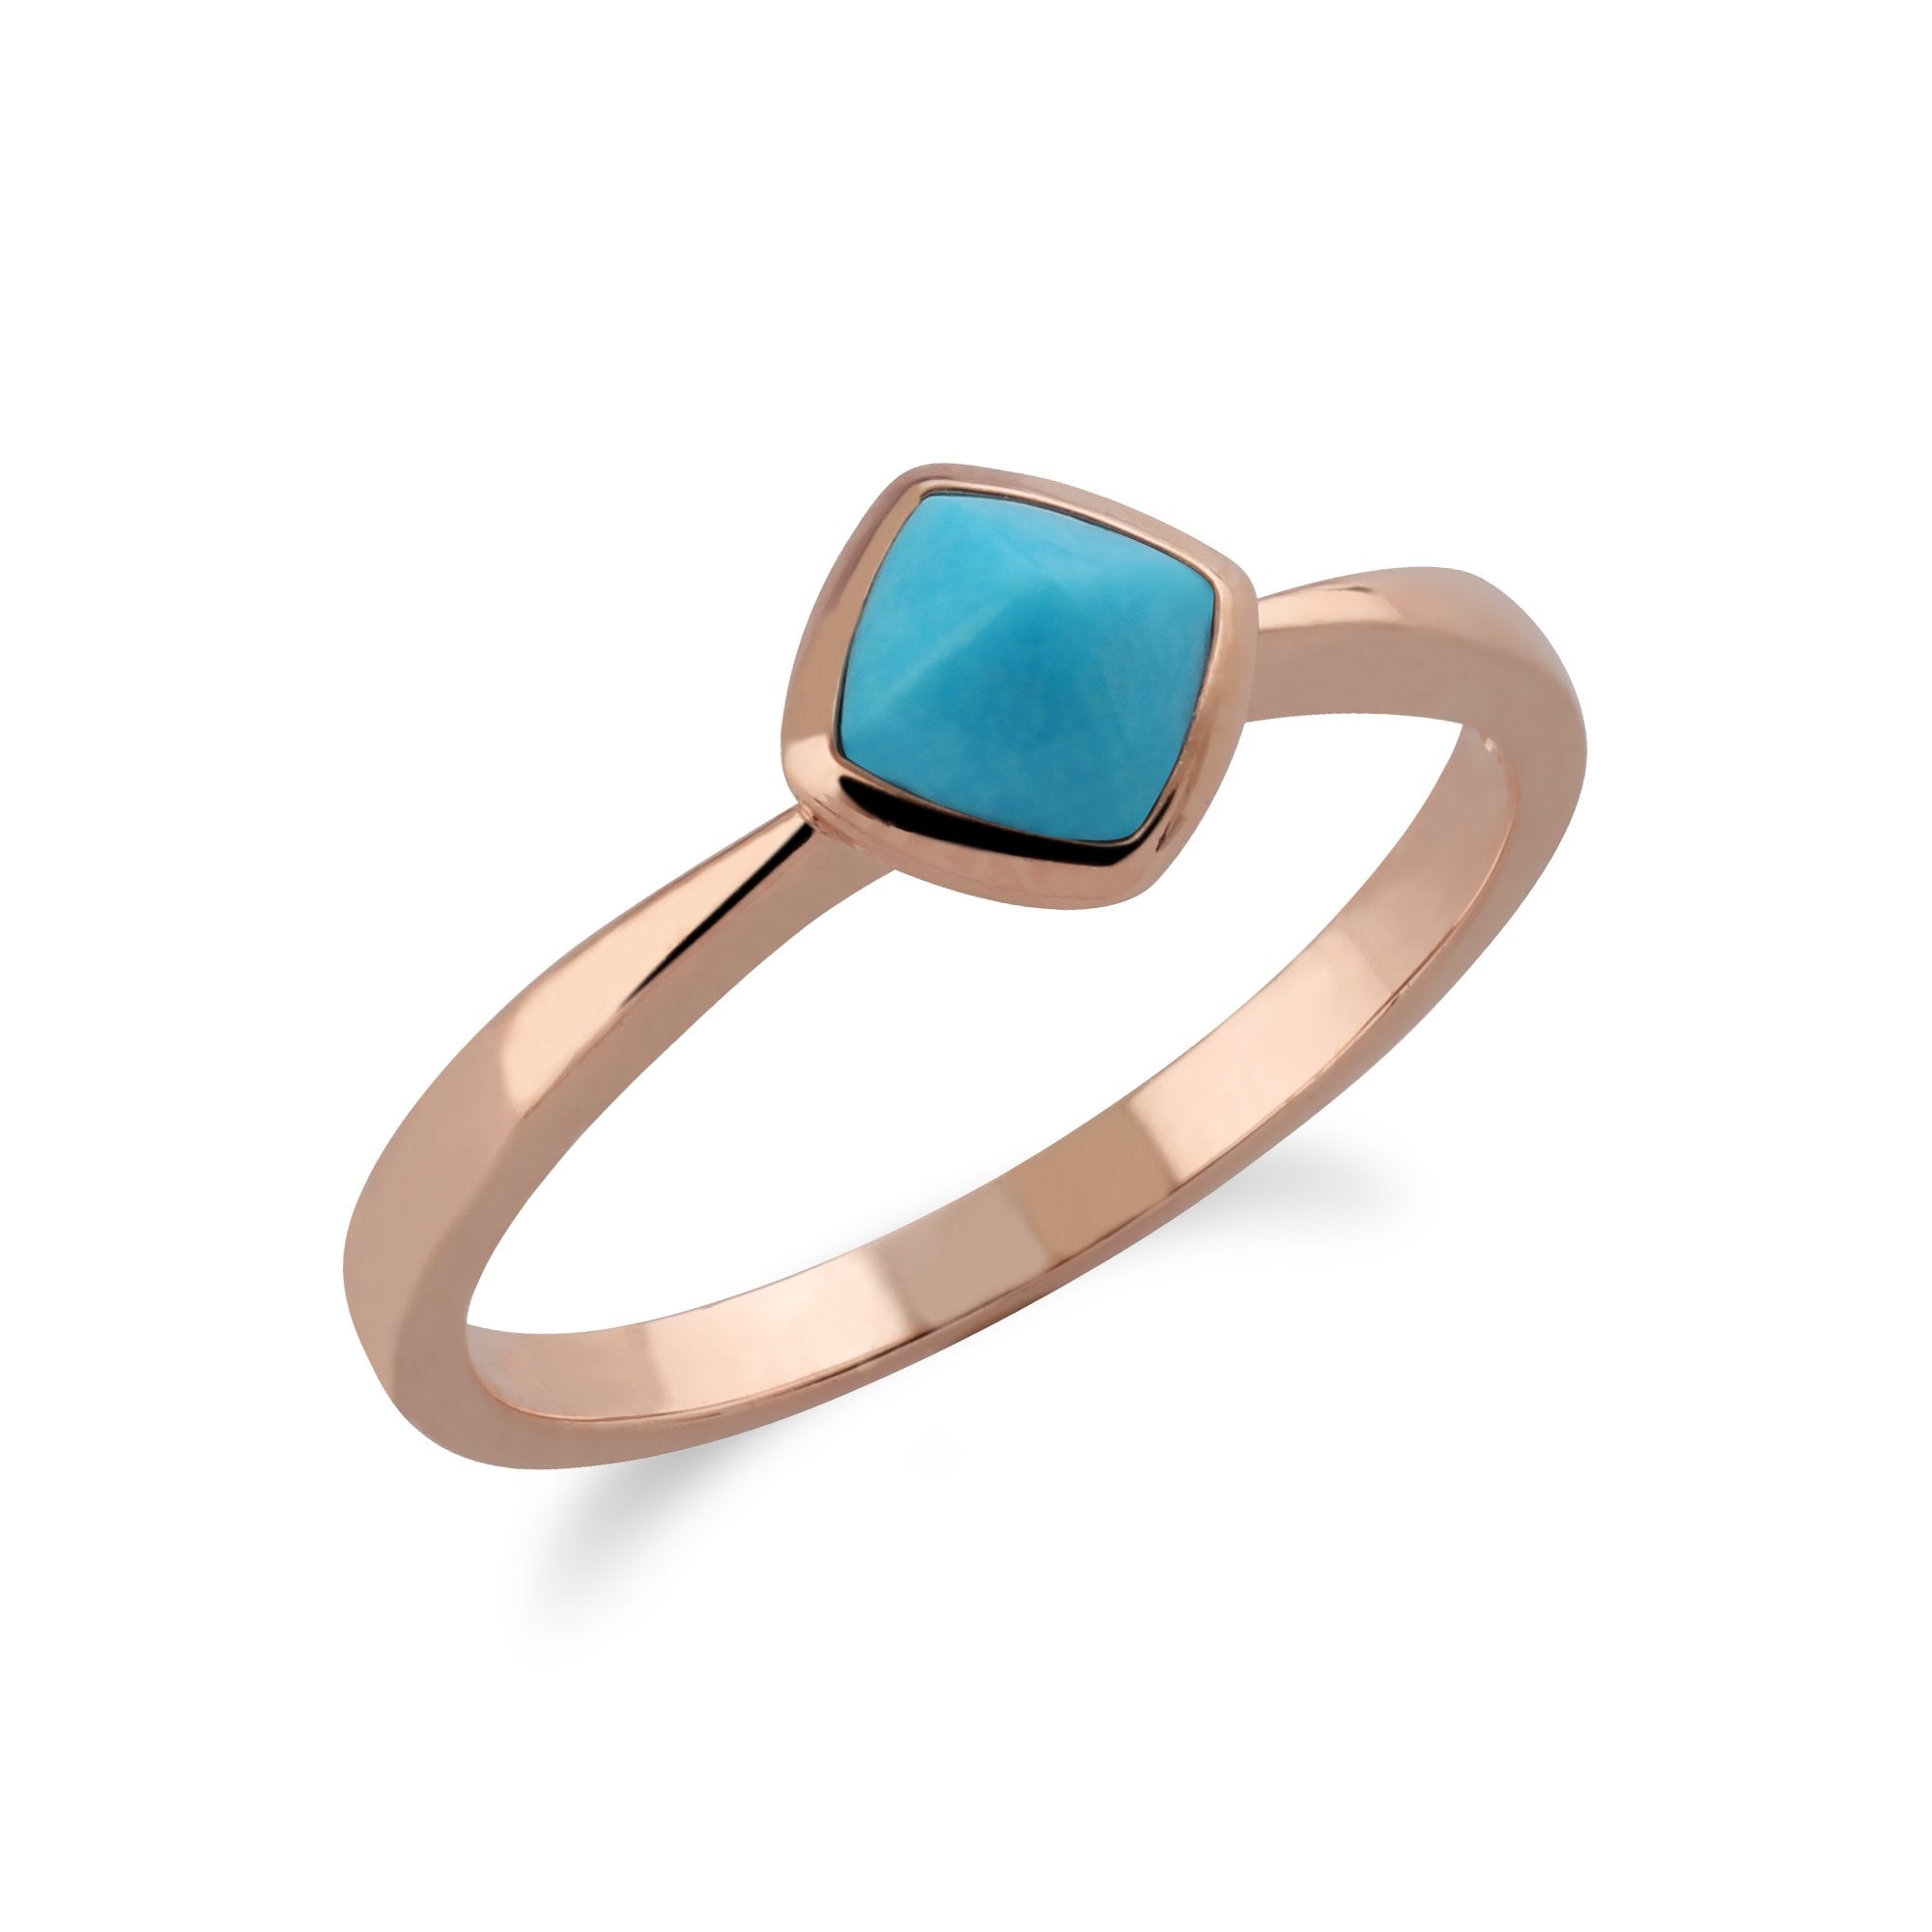 Gemondo Rose Gold Plated Sterling Silver Cushion Turquoise Ring Image 2